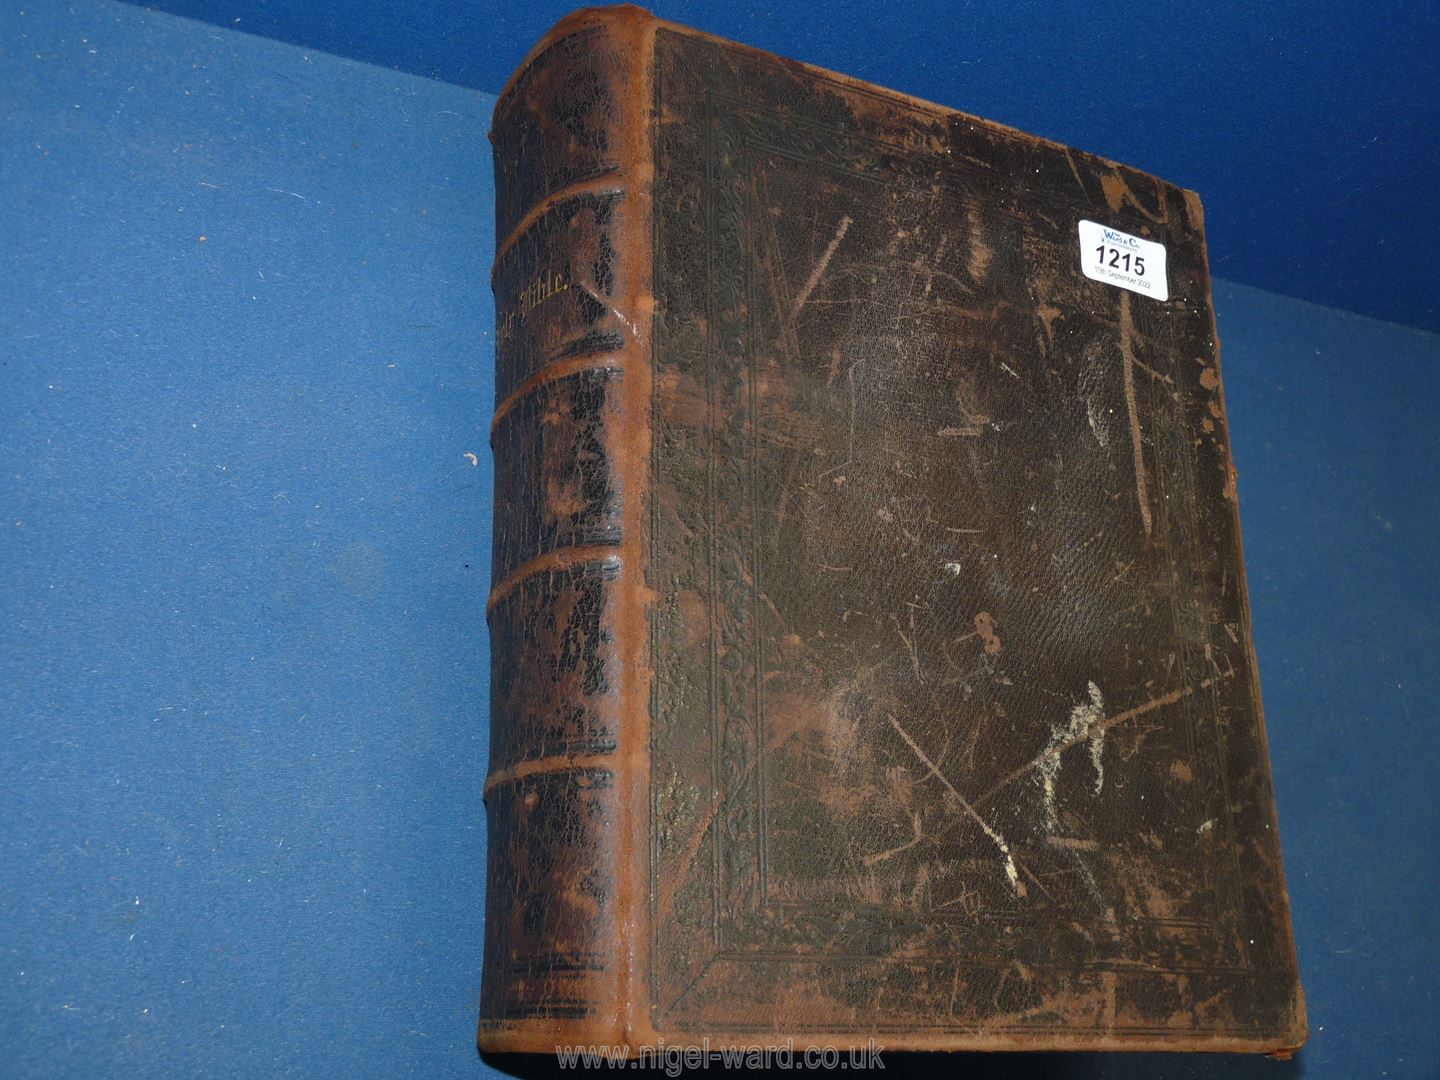 A volume - The Holy Bible with illustrations by Gustave Dore 1897 with blank family register and - Image 2 of 2